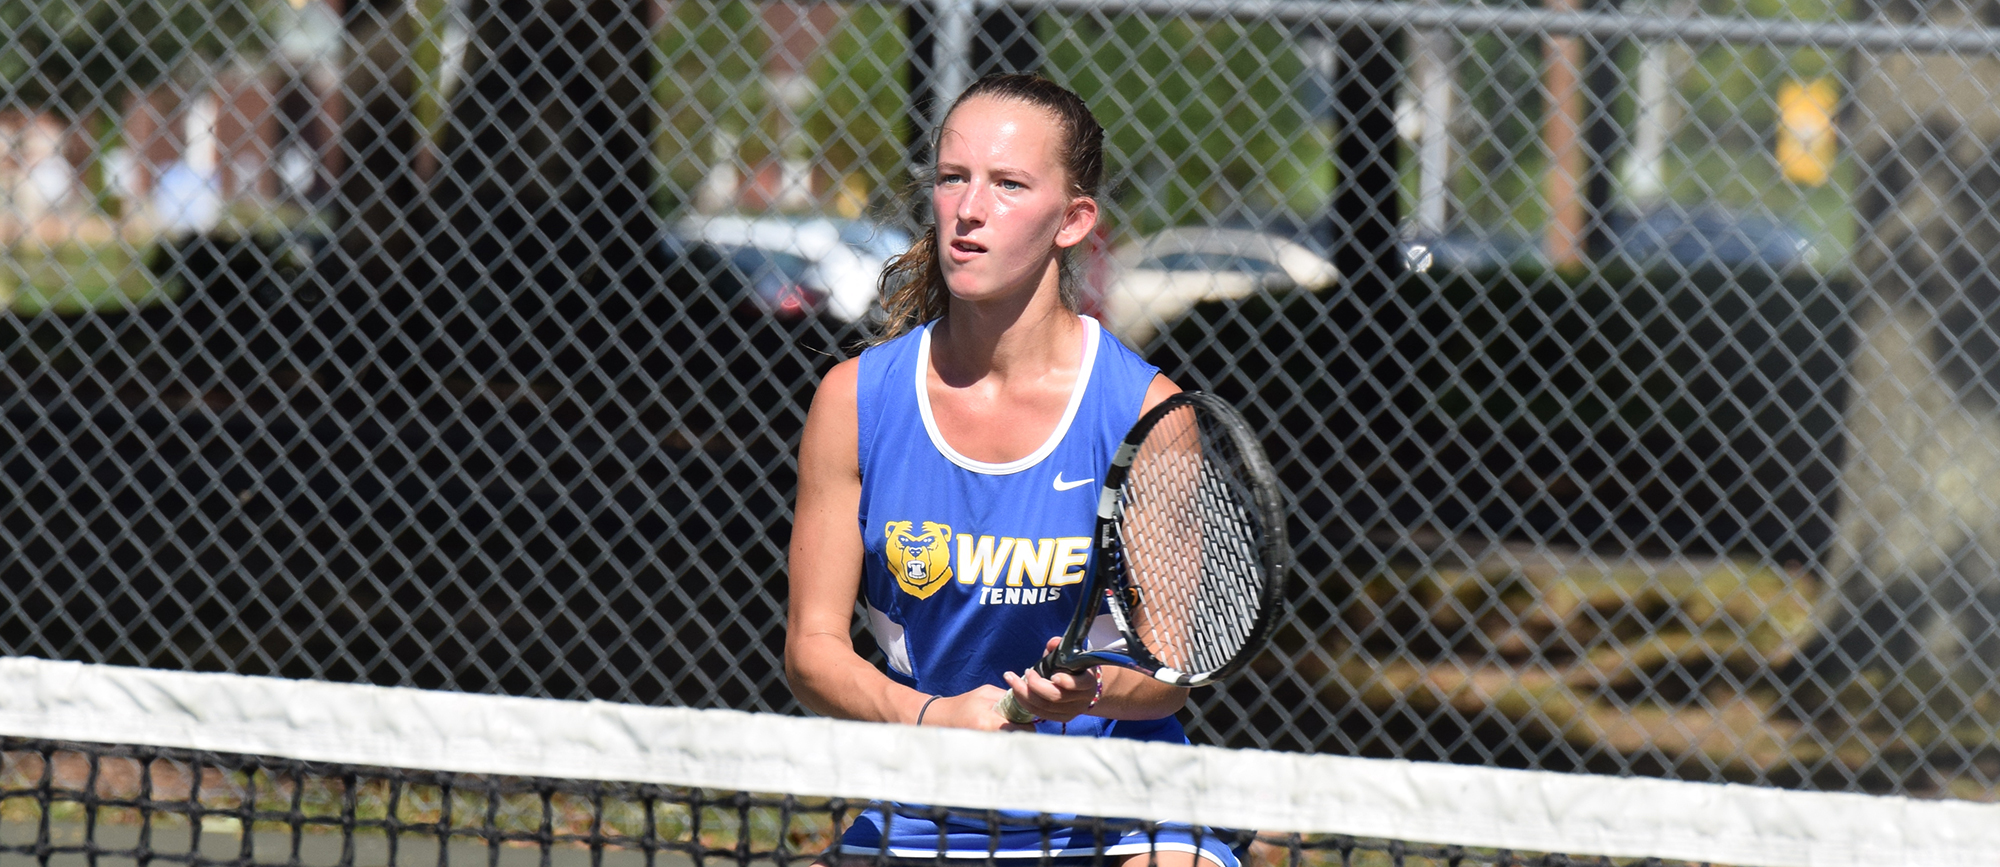 Junior Morgan Schrader posted a 6-1, 6-1 win at No. 2 singles, but the Golden Bears fell to JWU in their season opener on Sunday.